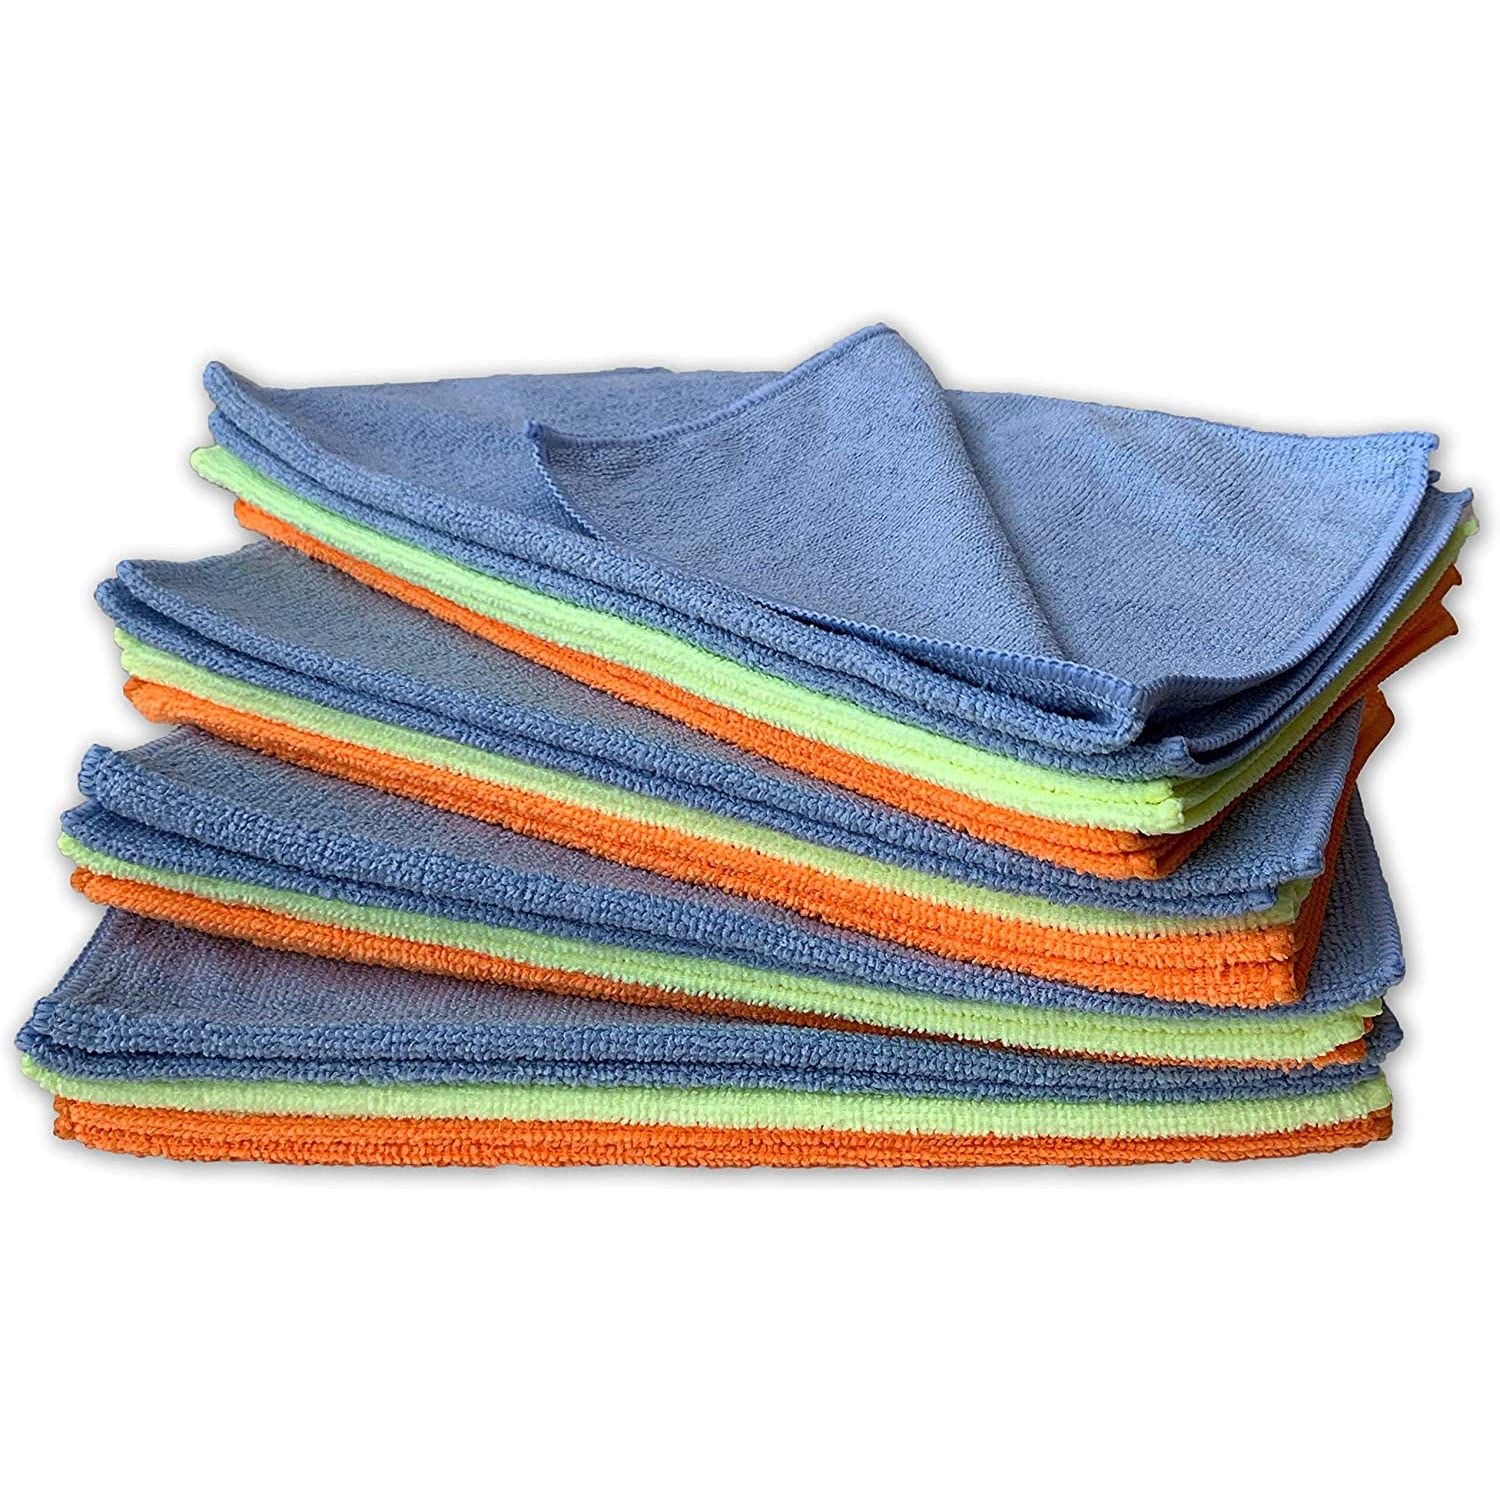 Microfiber Towels by Armor All, Multi-Purpose Towels for Cleaning, 24 Each